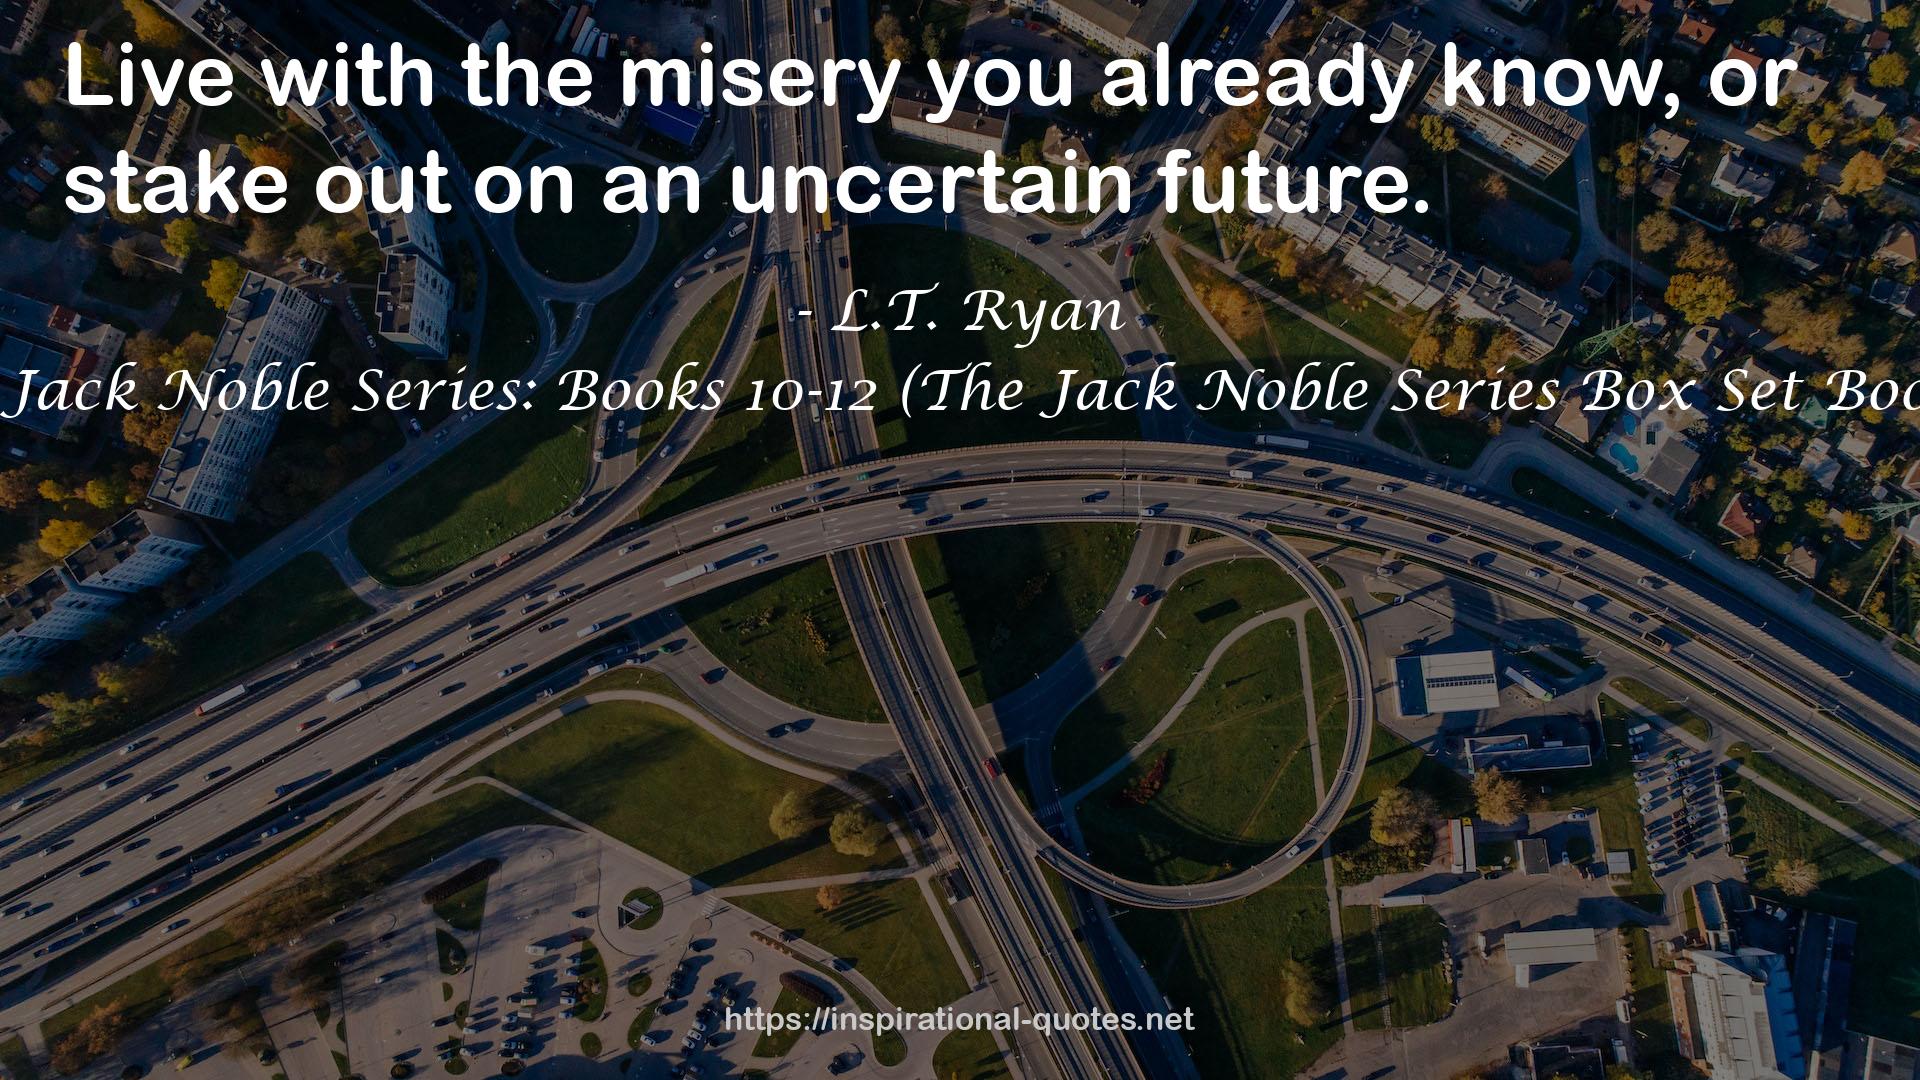 The Jack Noble Series: Books 10-12 (The Jack Noble Series Box Set Book 4) QUOTES